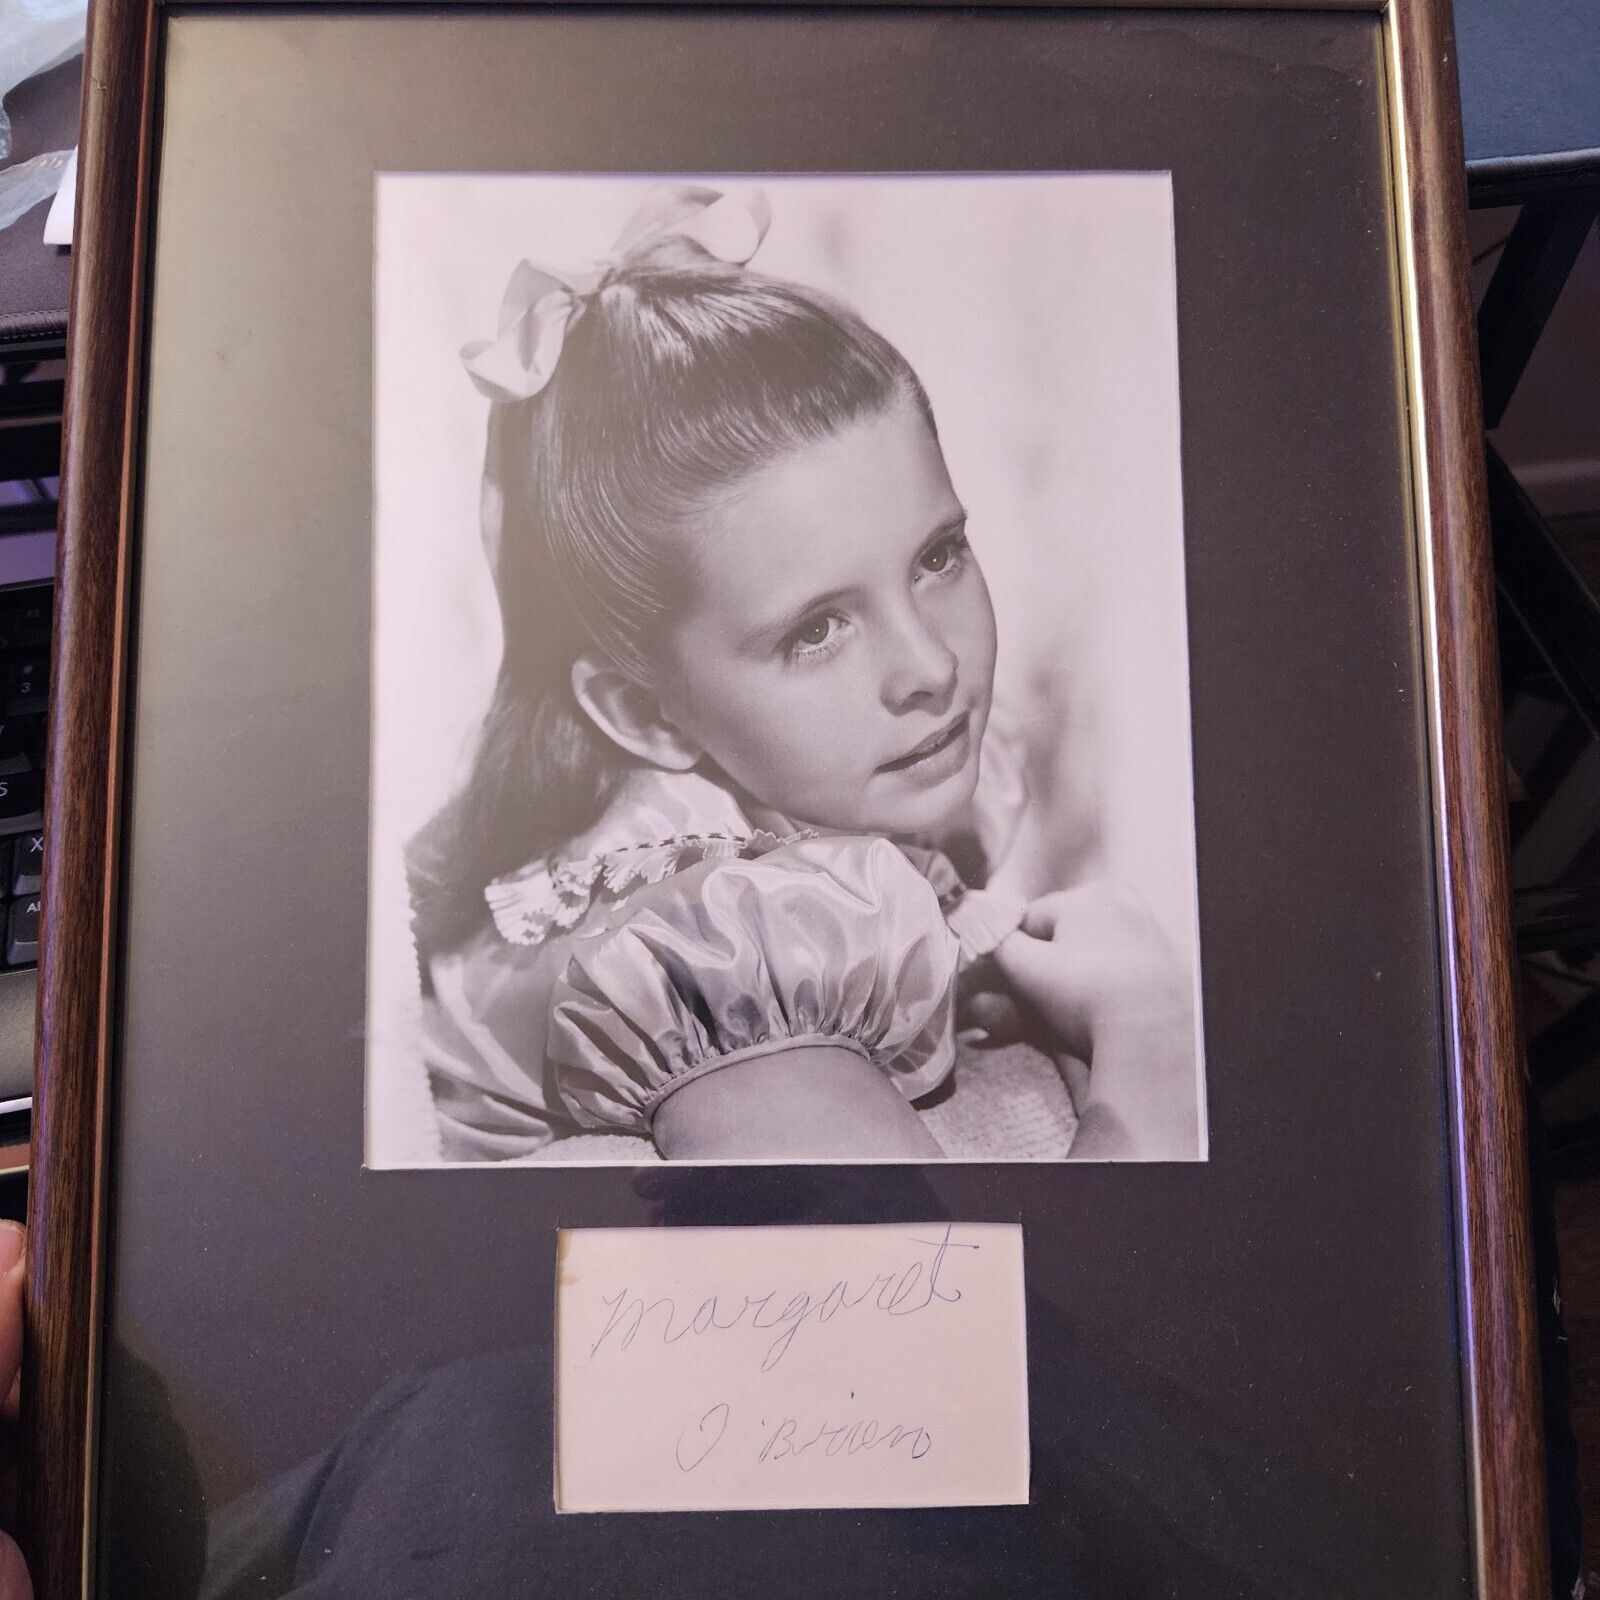 AUTOGRAPH CHILD ACTOR MARGARET O'BRIEN SIGNED AT 7 YEARS OLD VERY RARE